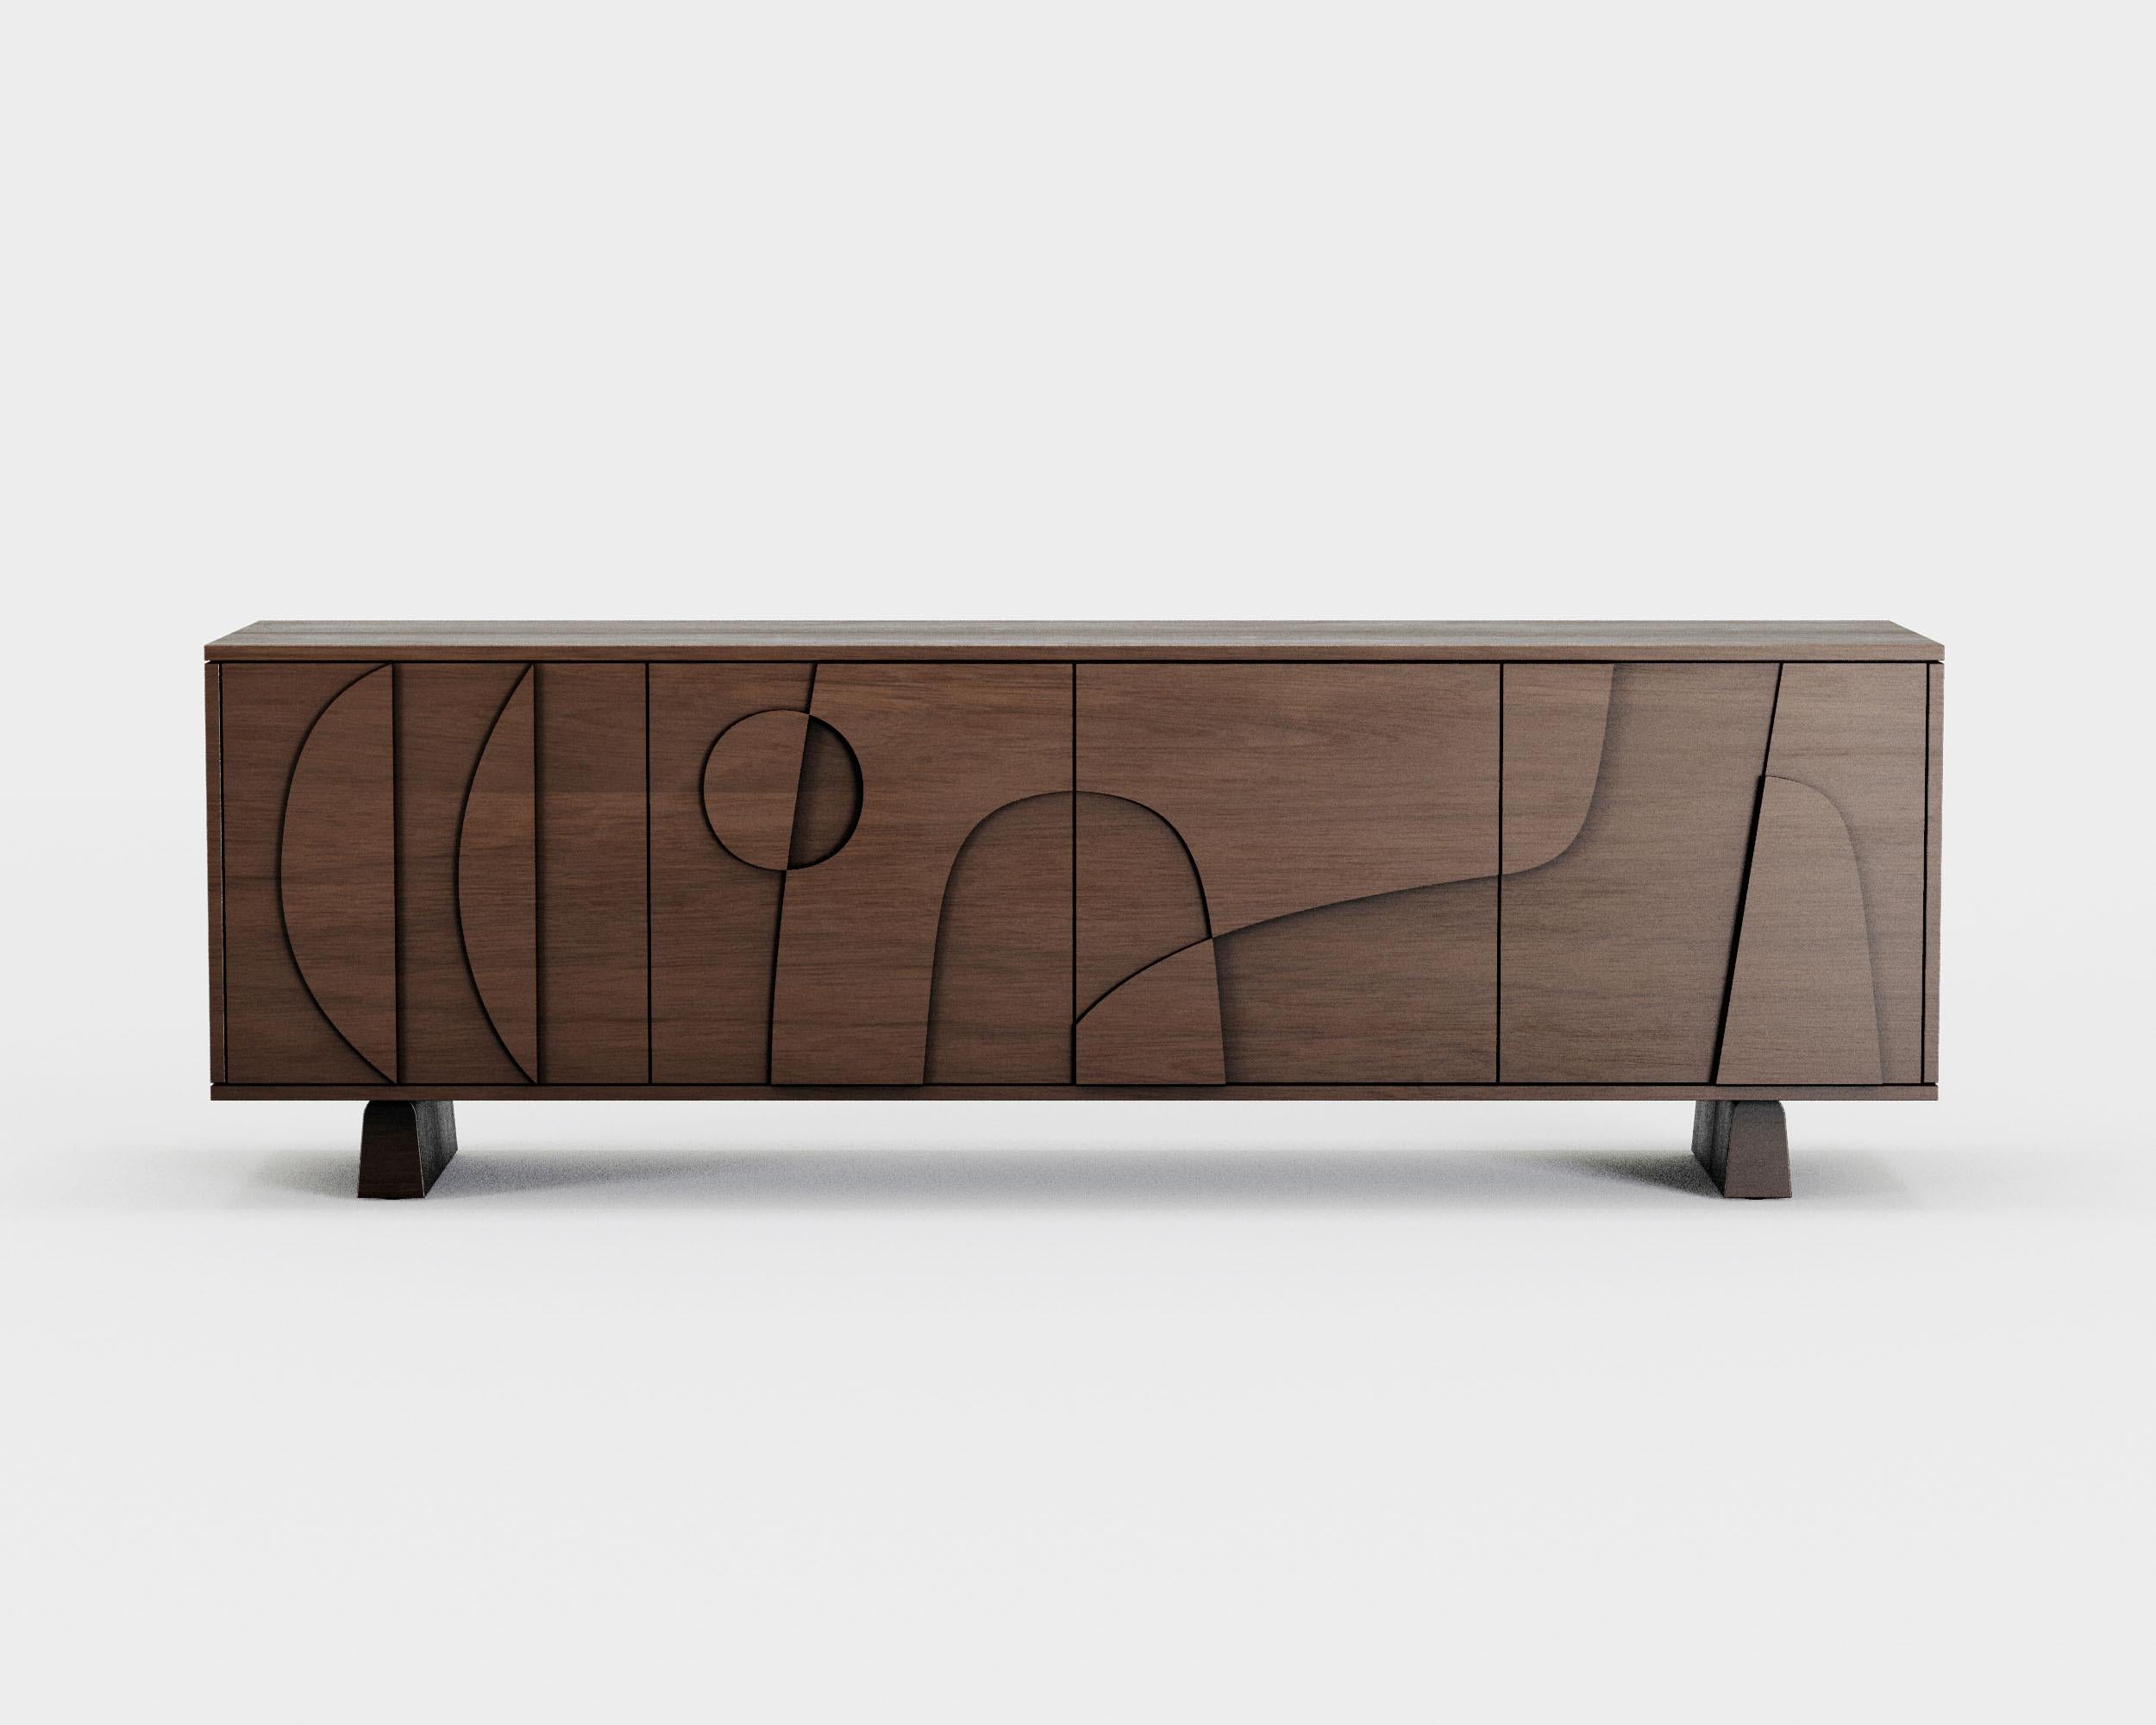 'Wynwood' 4 Sideboard by Man of Parts
Signed by Sebastian Herkner

Dimensions: H. 68 x 49 x 213.5 cm
Available in various finishes: Black oak, nude oak, whiskey oak
Leg height available: Tall, Short, Wall mount

Model shown: Whiskey oak finish,